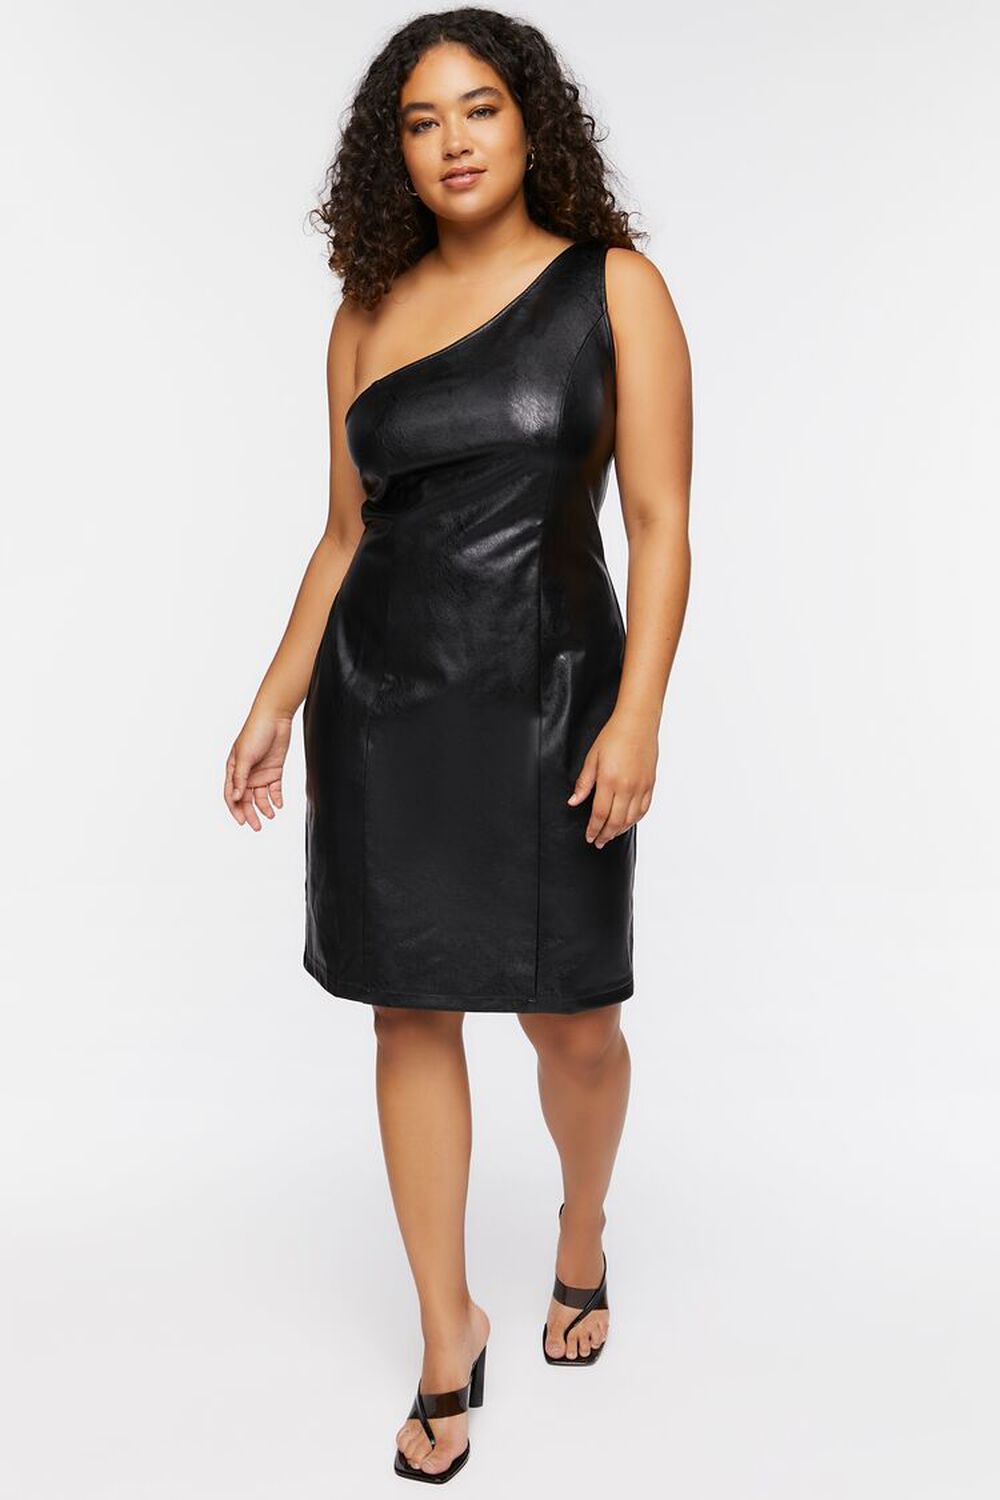 Must Have Plus Size Leather Dresses You Can Wear This Spring